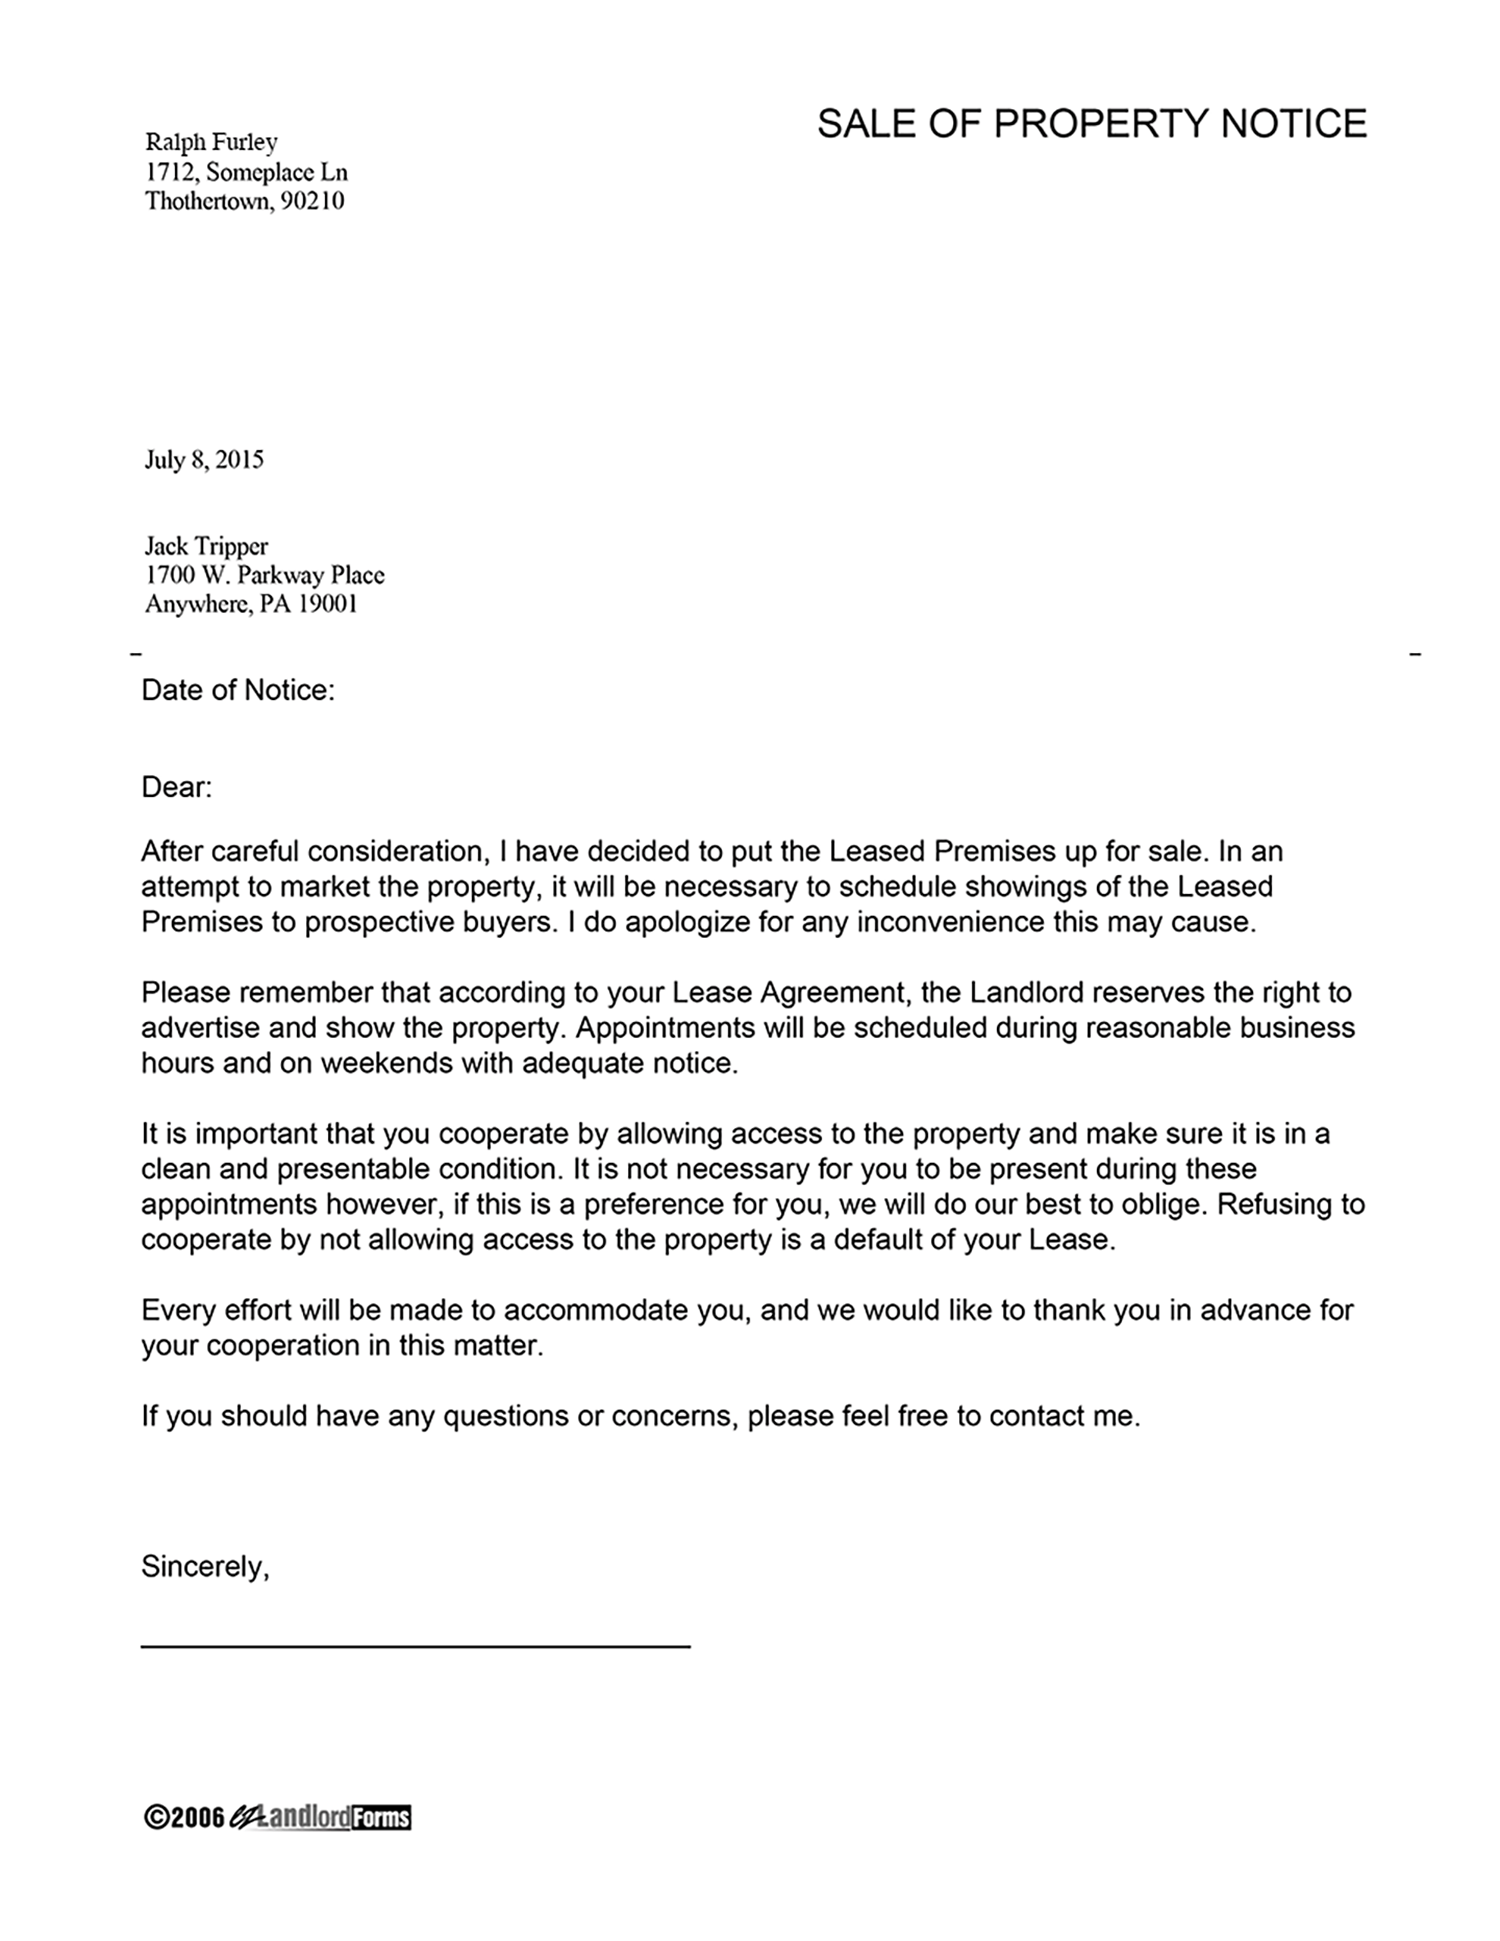 Good Tenant Letter From Landlord from www.ezlandlordforms.com